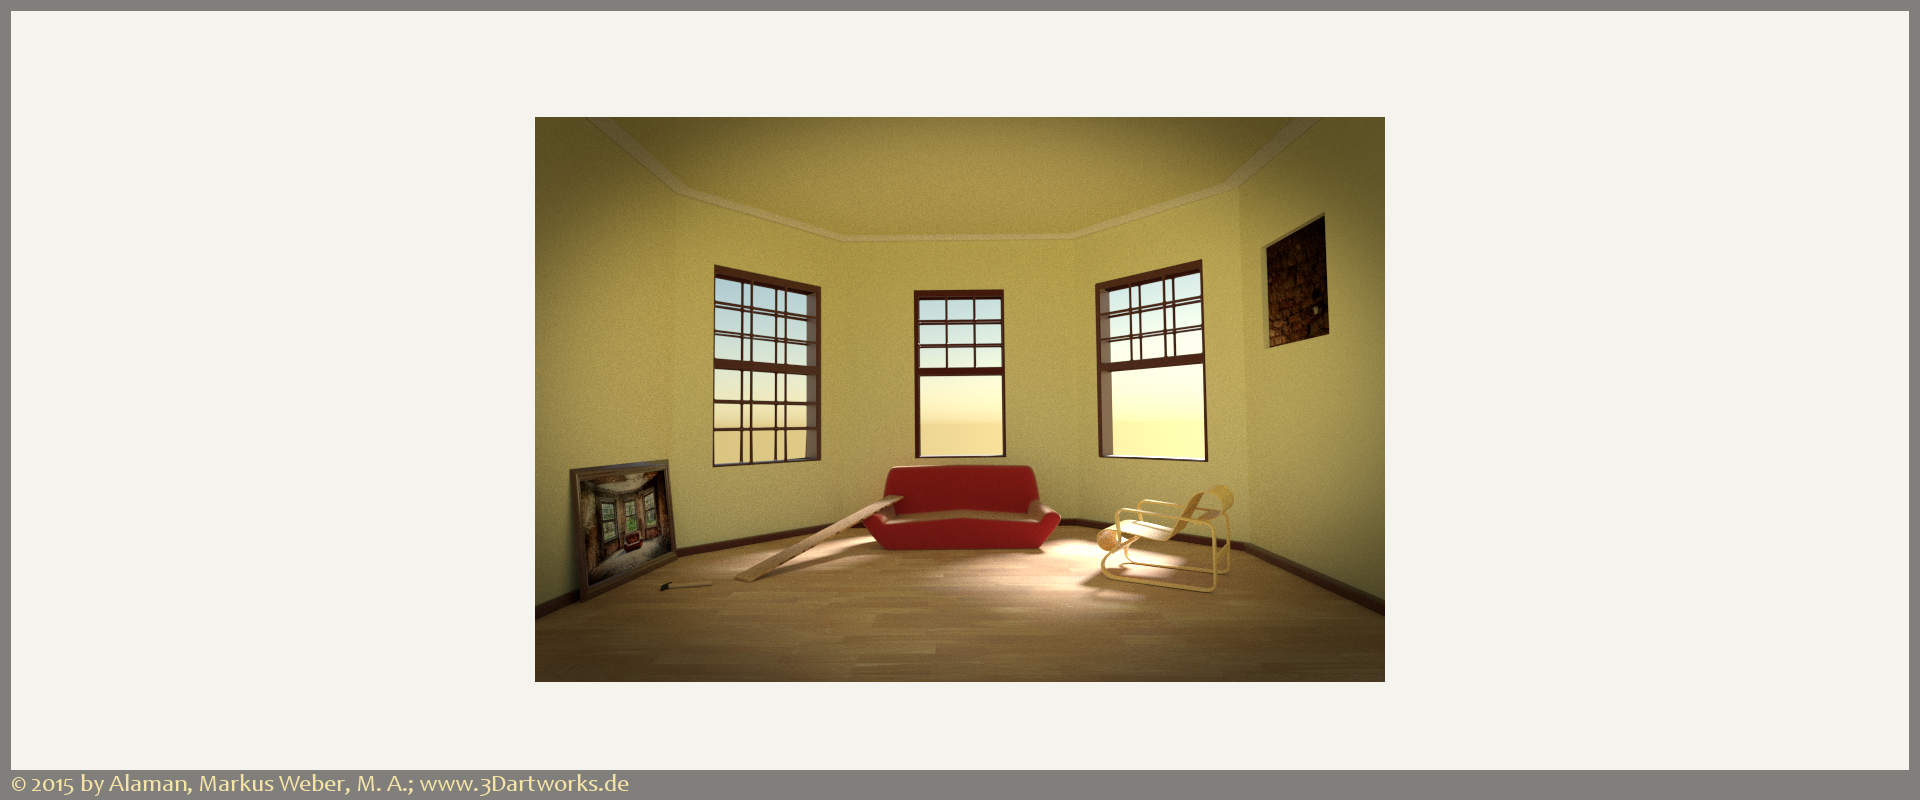 Work in progress at Alaman 3D Artworks: architectural visualization, the renovation is not finished yet.